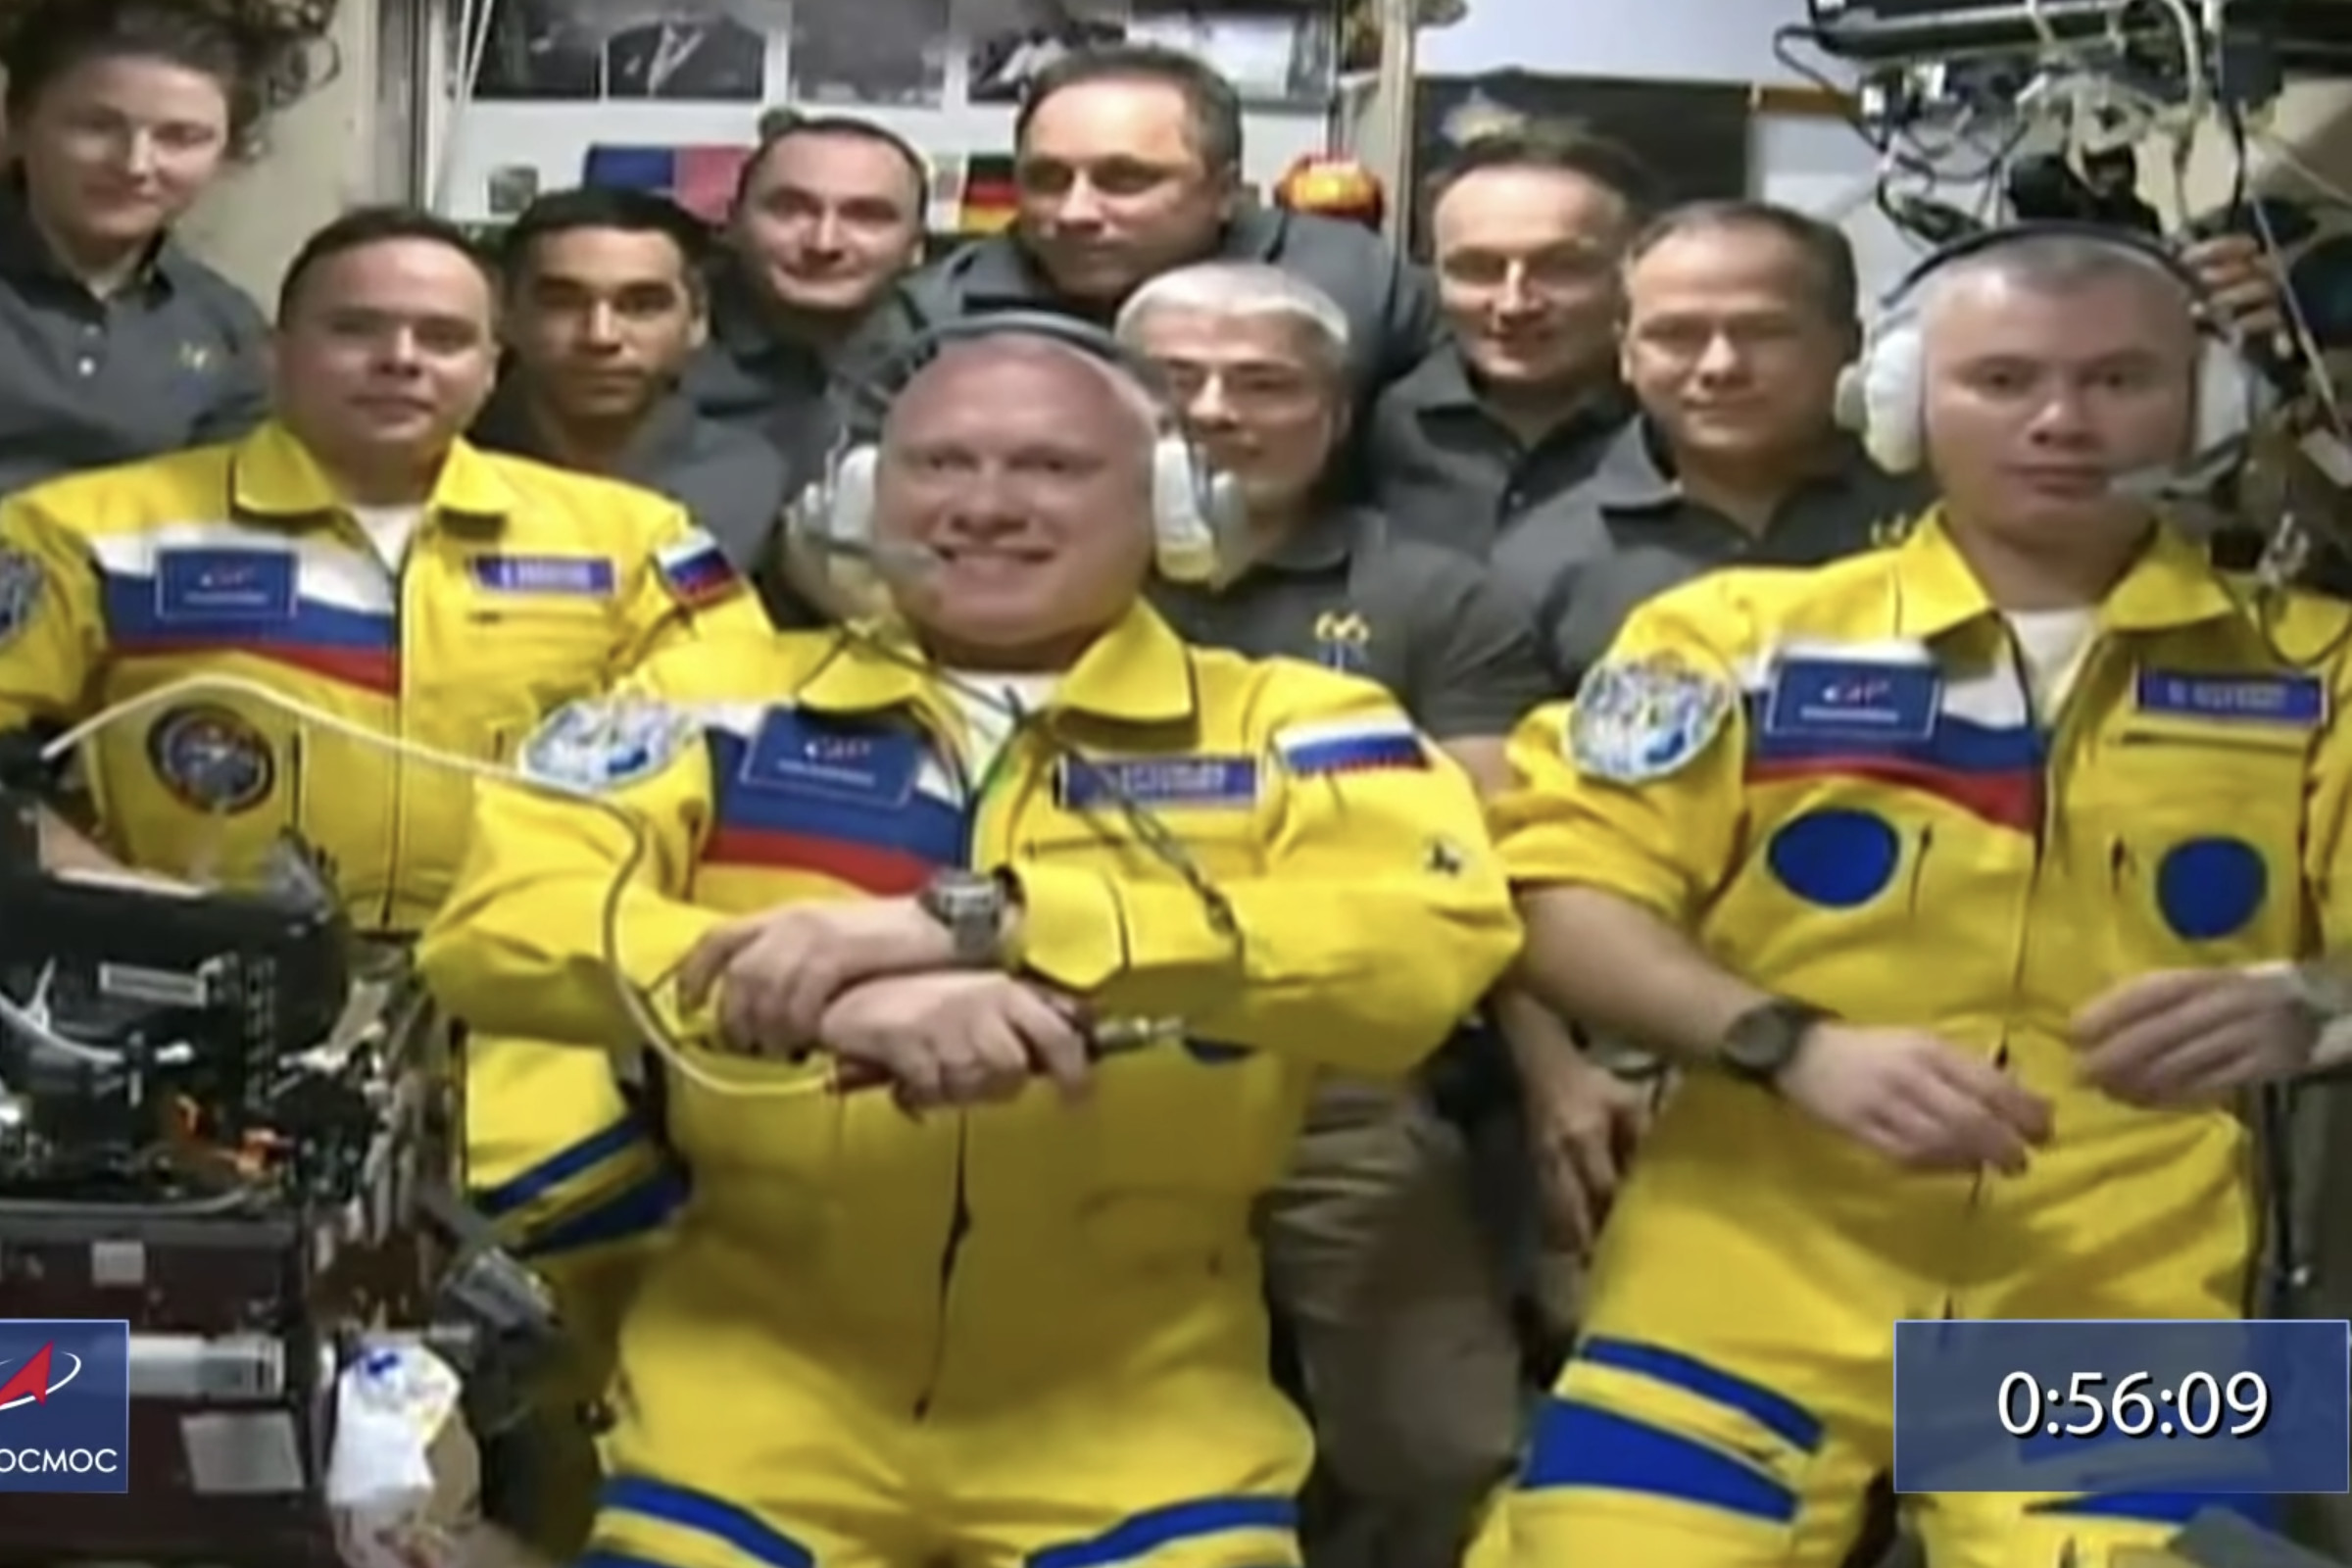 Cosmonauts boarded the ISS wearing the colors of the Ukrainian flag.